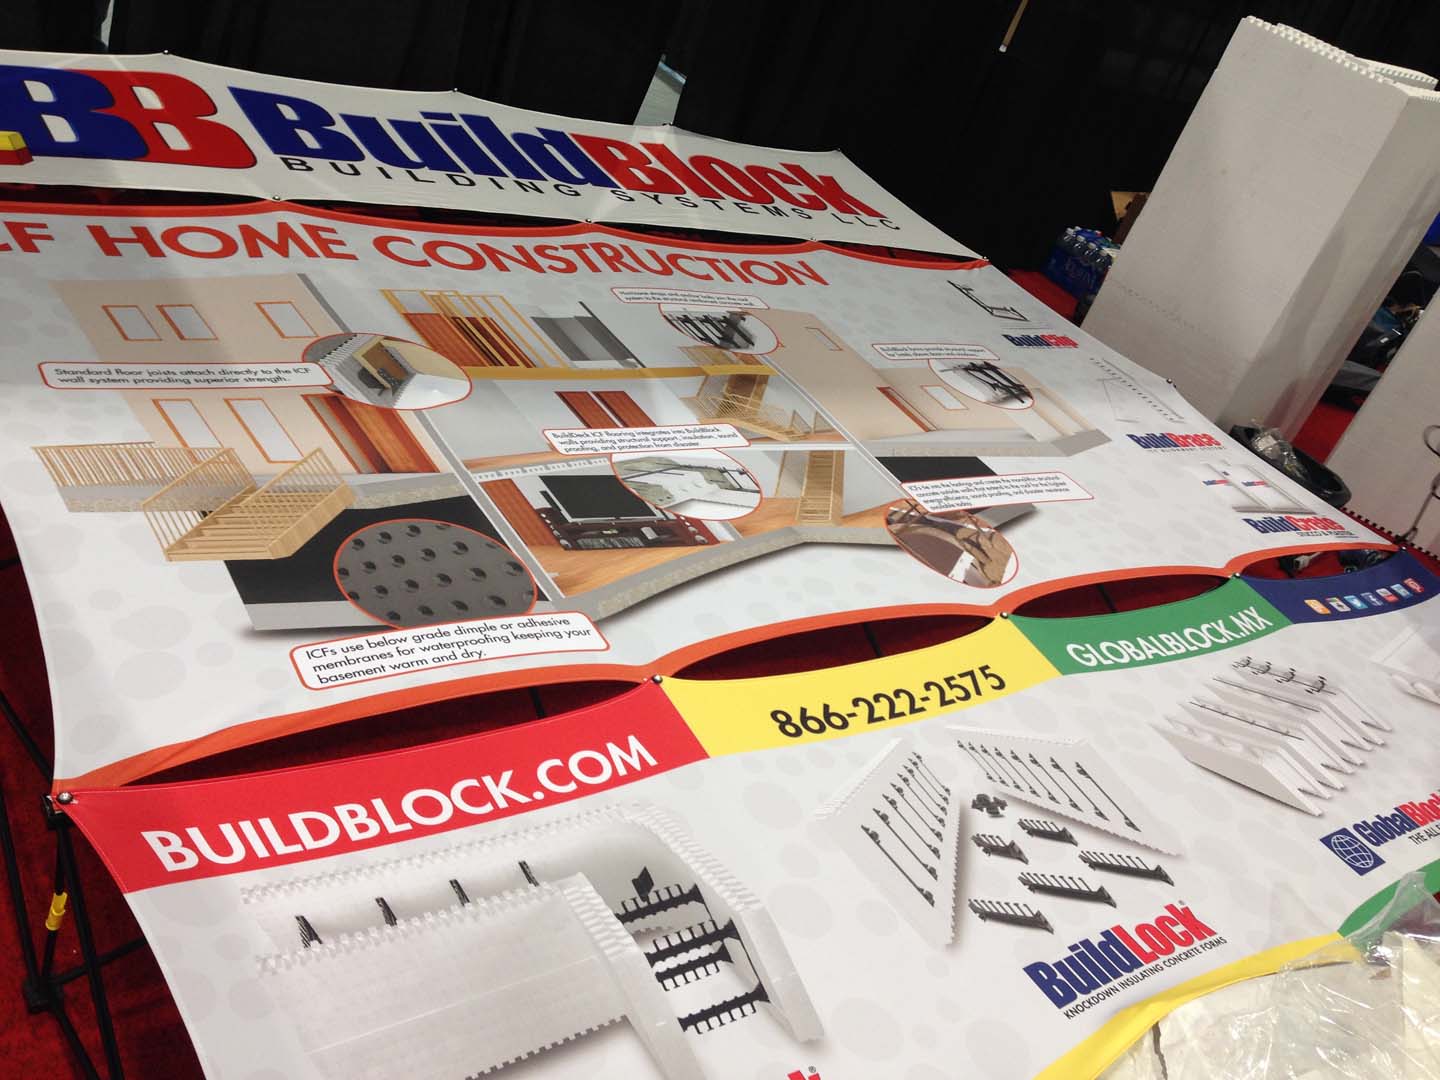 BuildBlock at 2015 World of Concrete